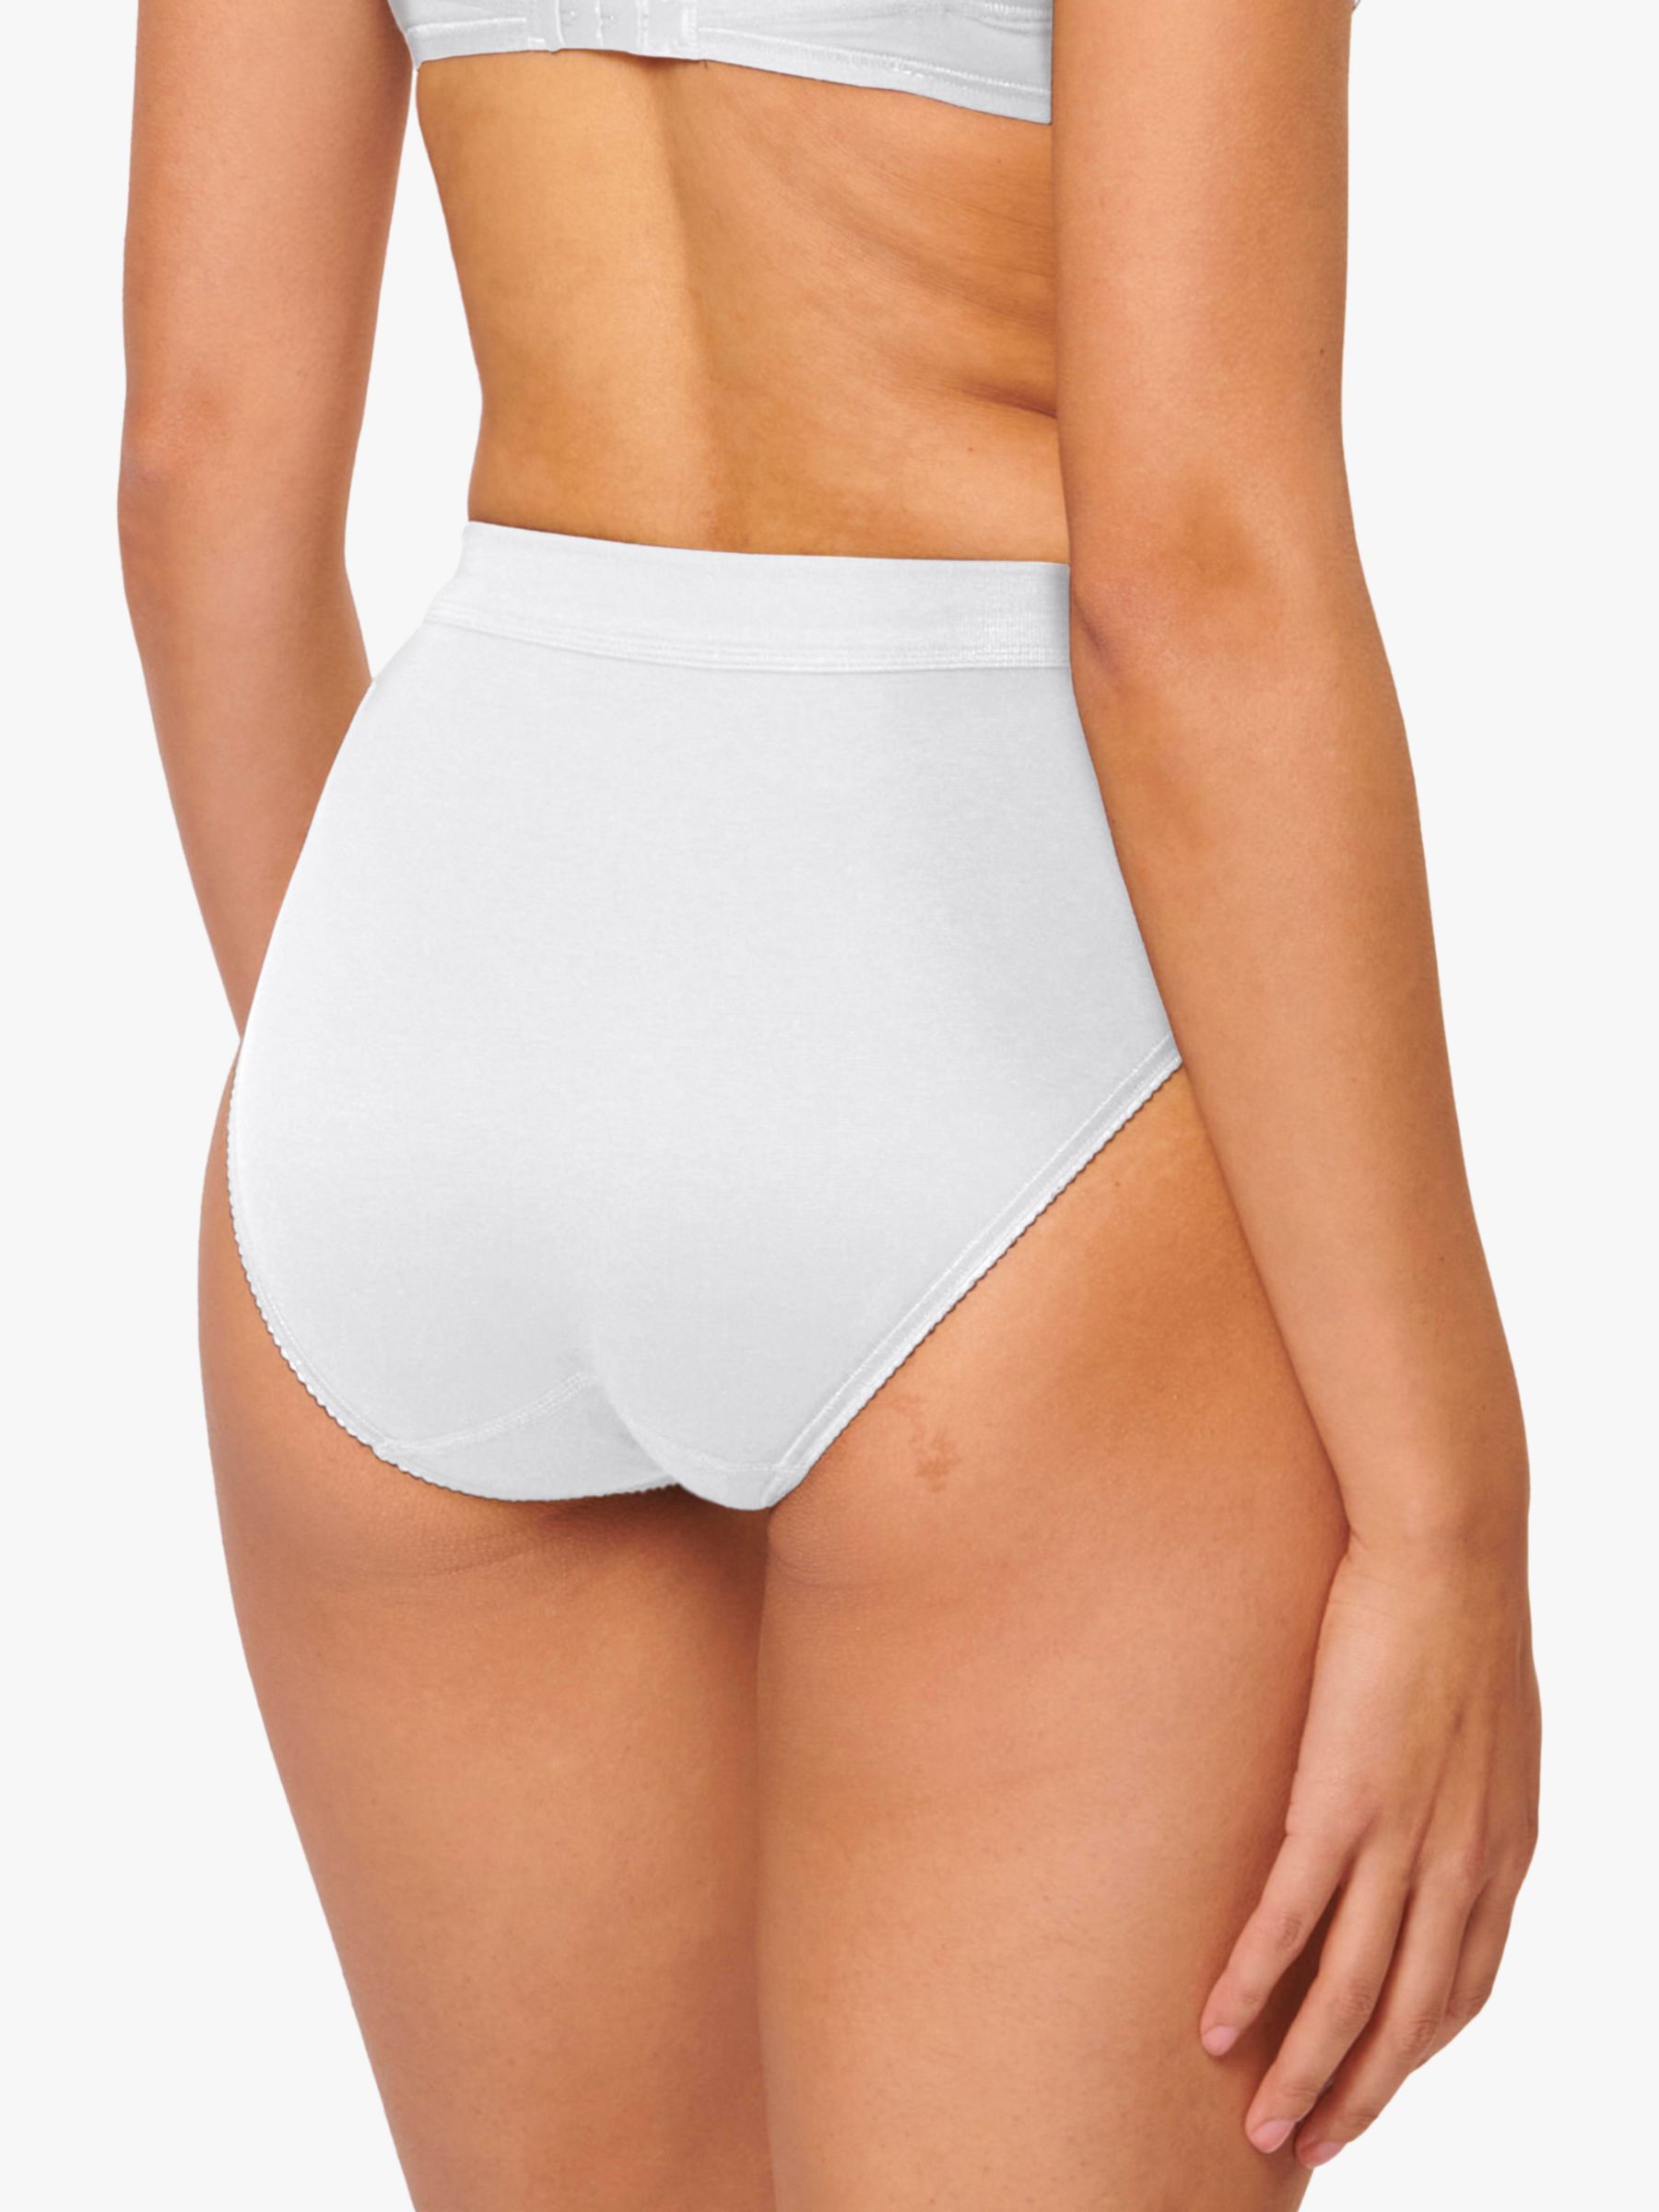 Buy sloggi Double Comfort Tai Knickers, Pack of 2 Online at johnlewis.com